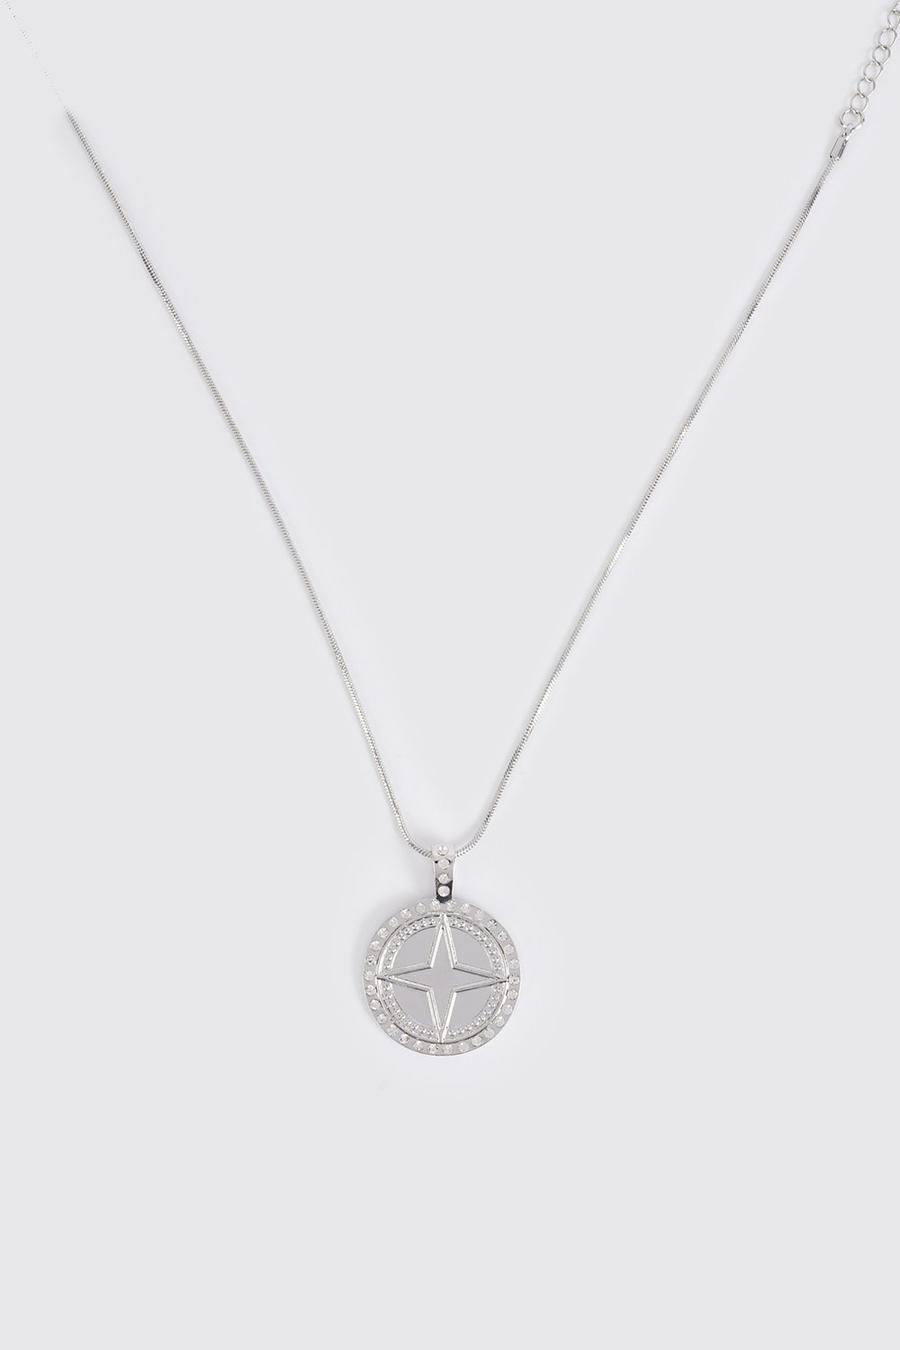 Silver Iced Compass Pendant Necklace